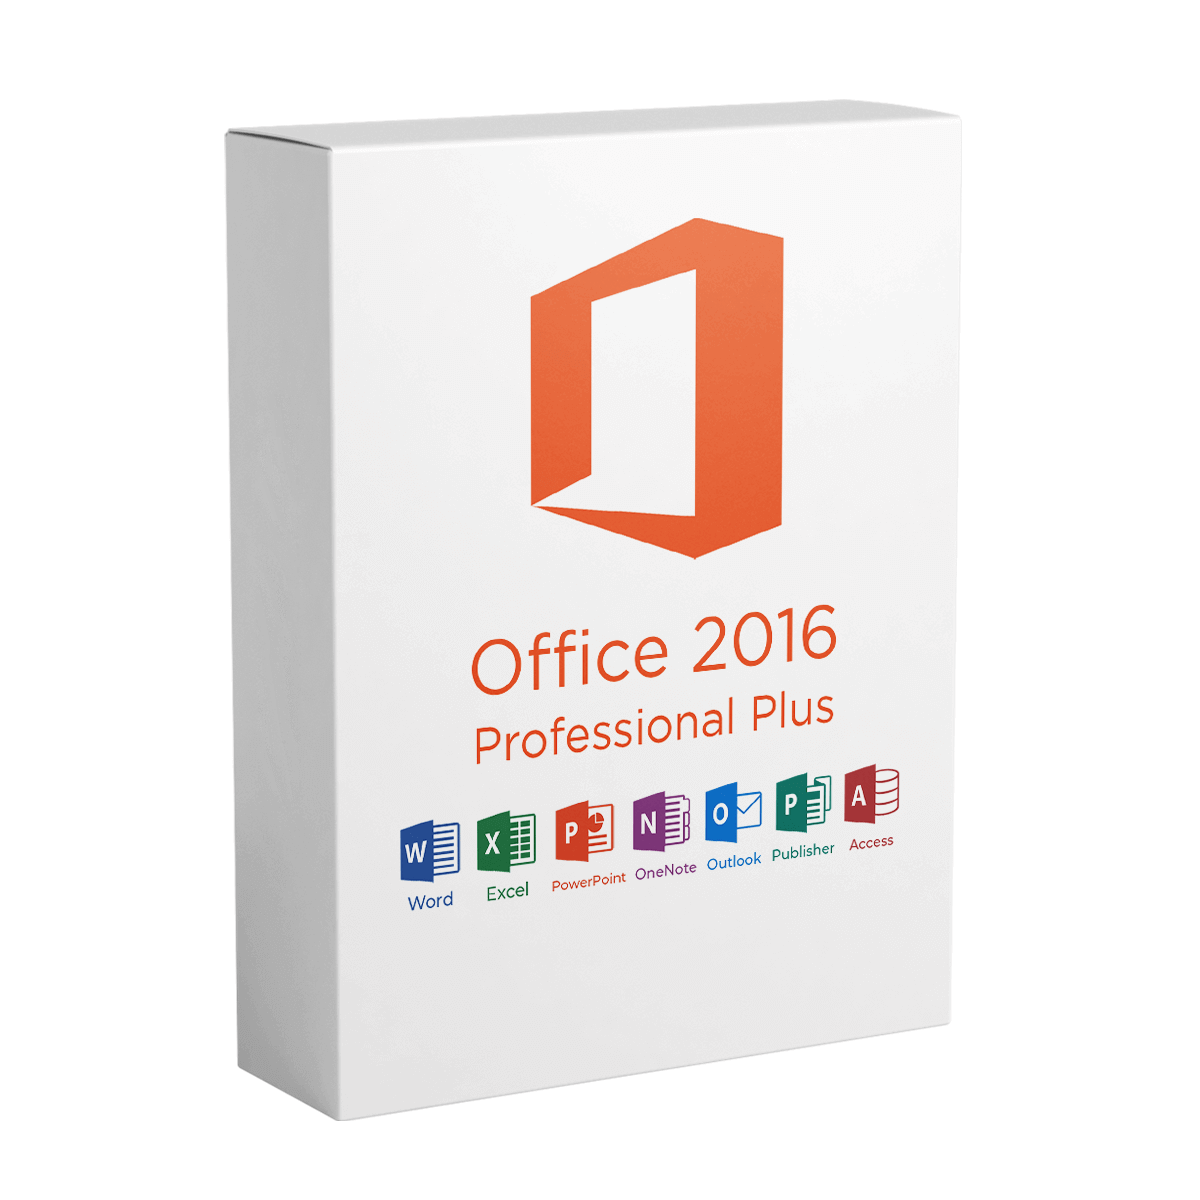 Office 2016 Professional Plus - Lifetime License for 1 PC